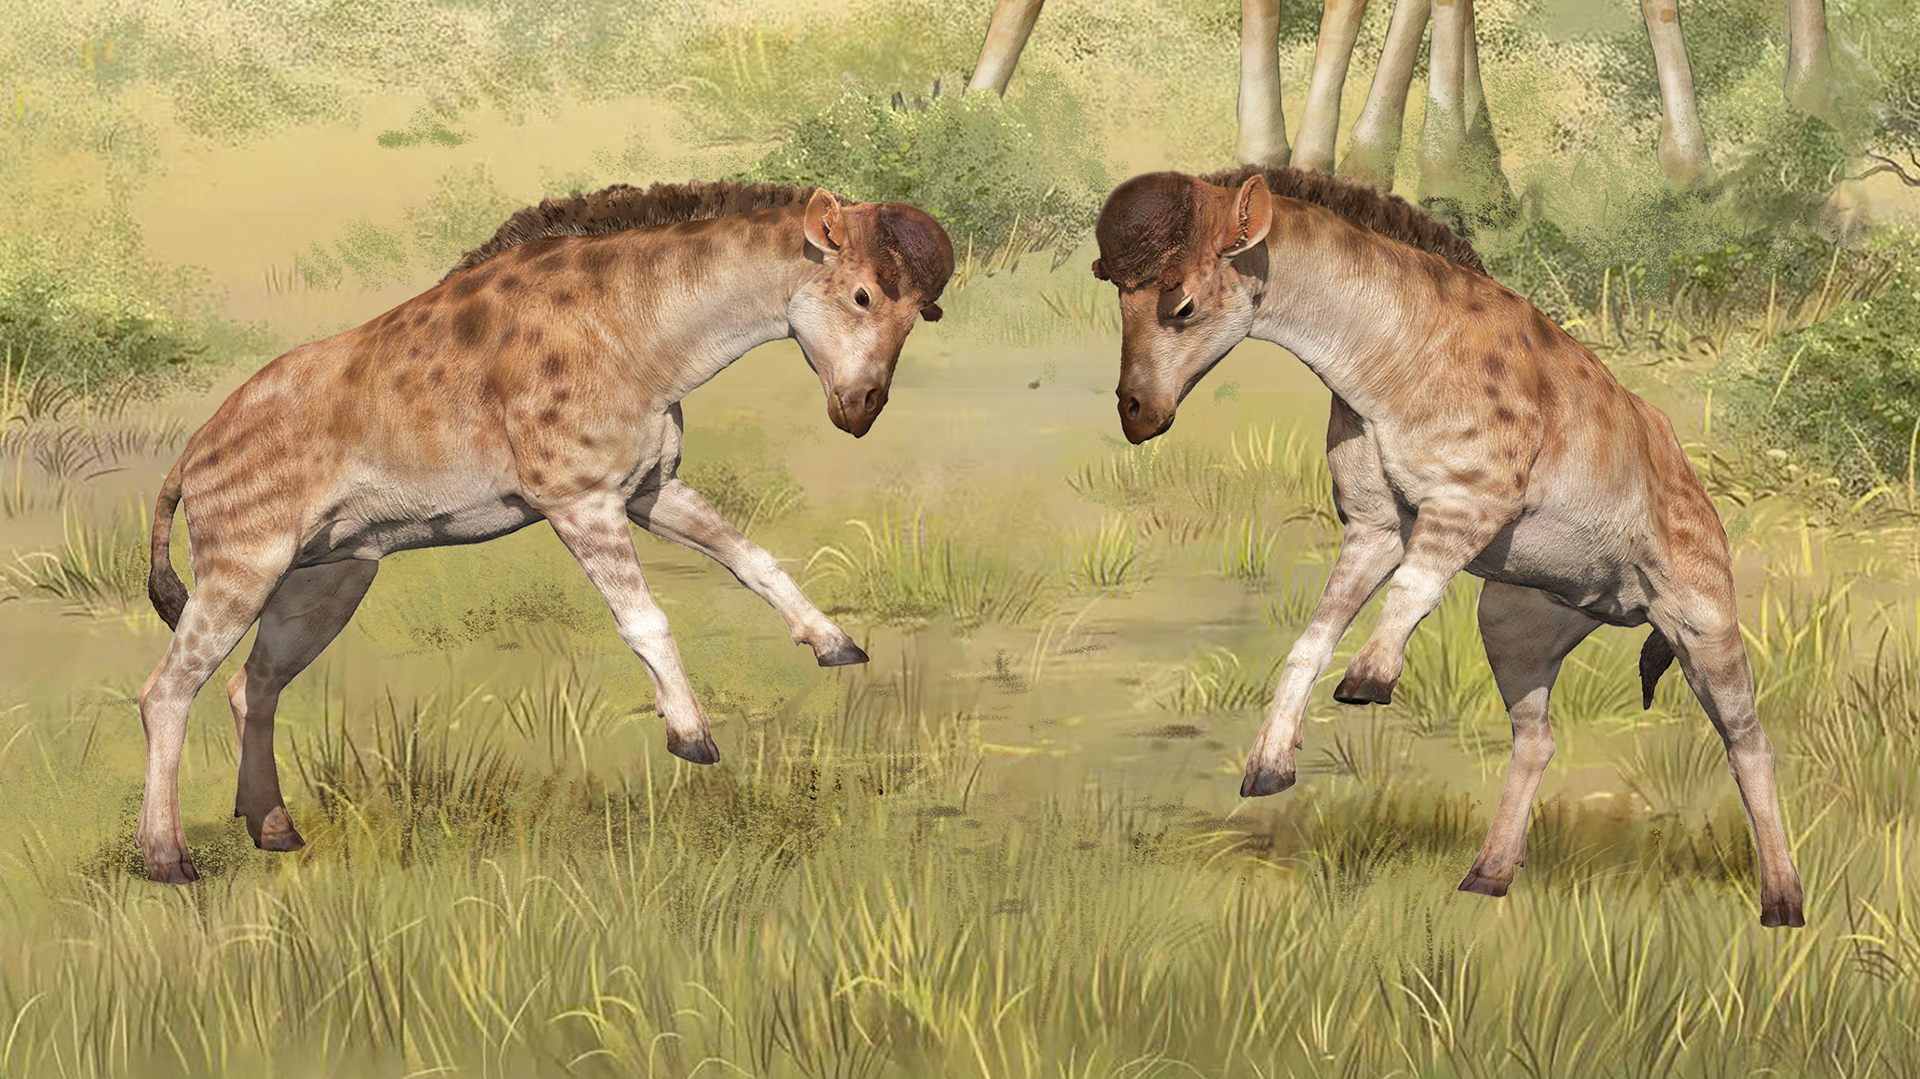 Short-necked giraffe relative discovered in China. It used its helmet head  to bash rivals. | Live Science